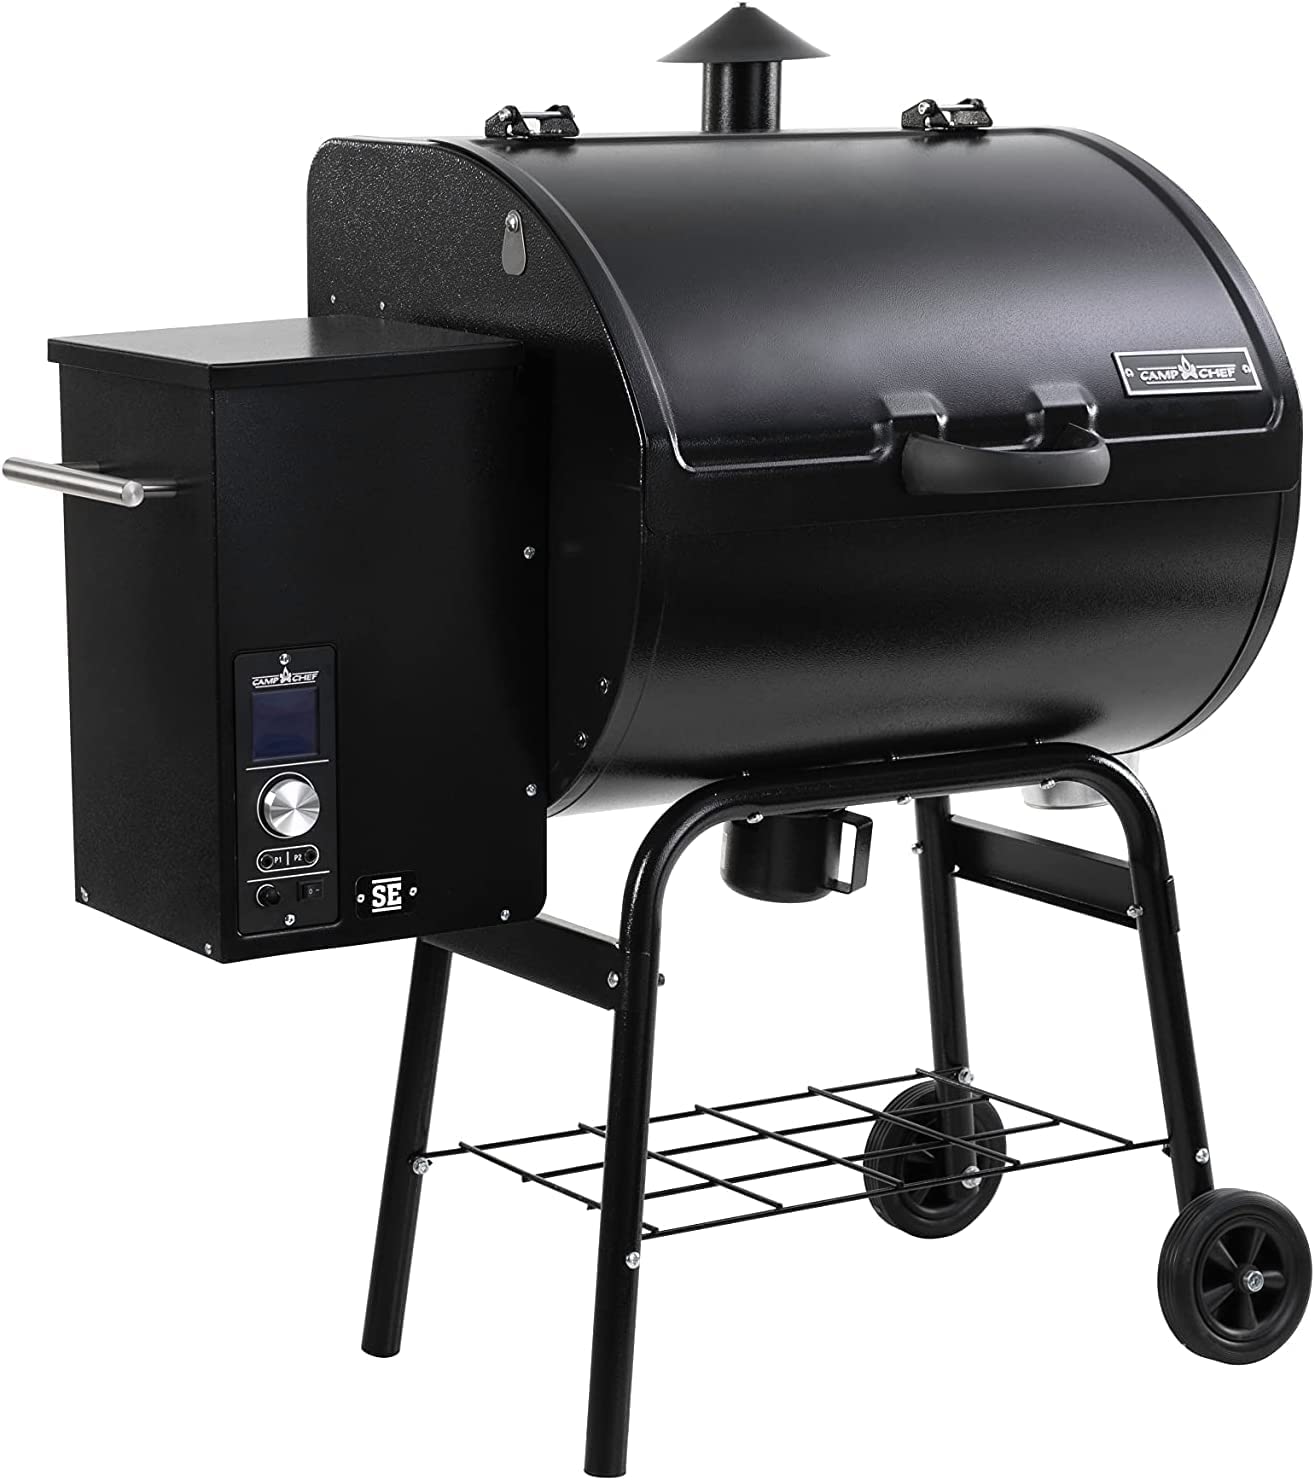 Camp Chef SmokePro SE Pellet Grill - image 2 of 8